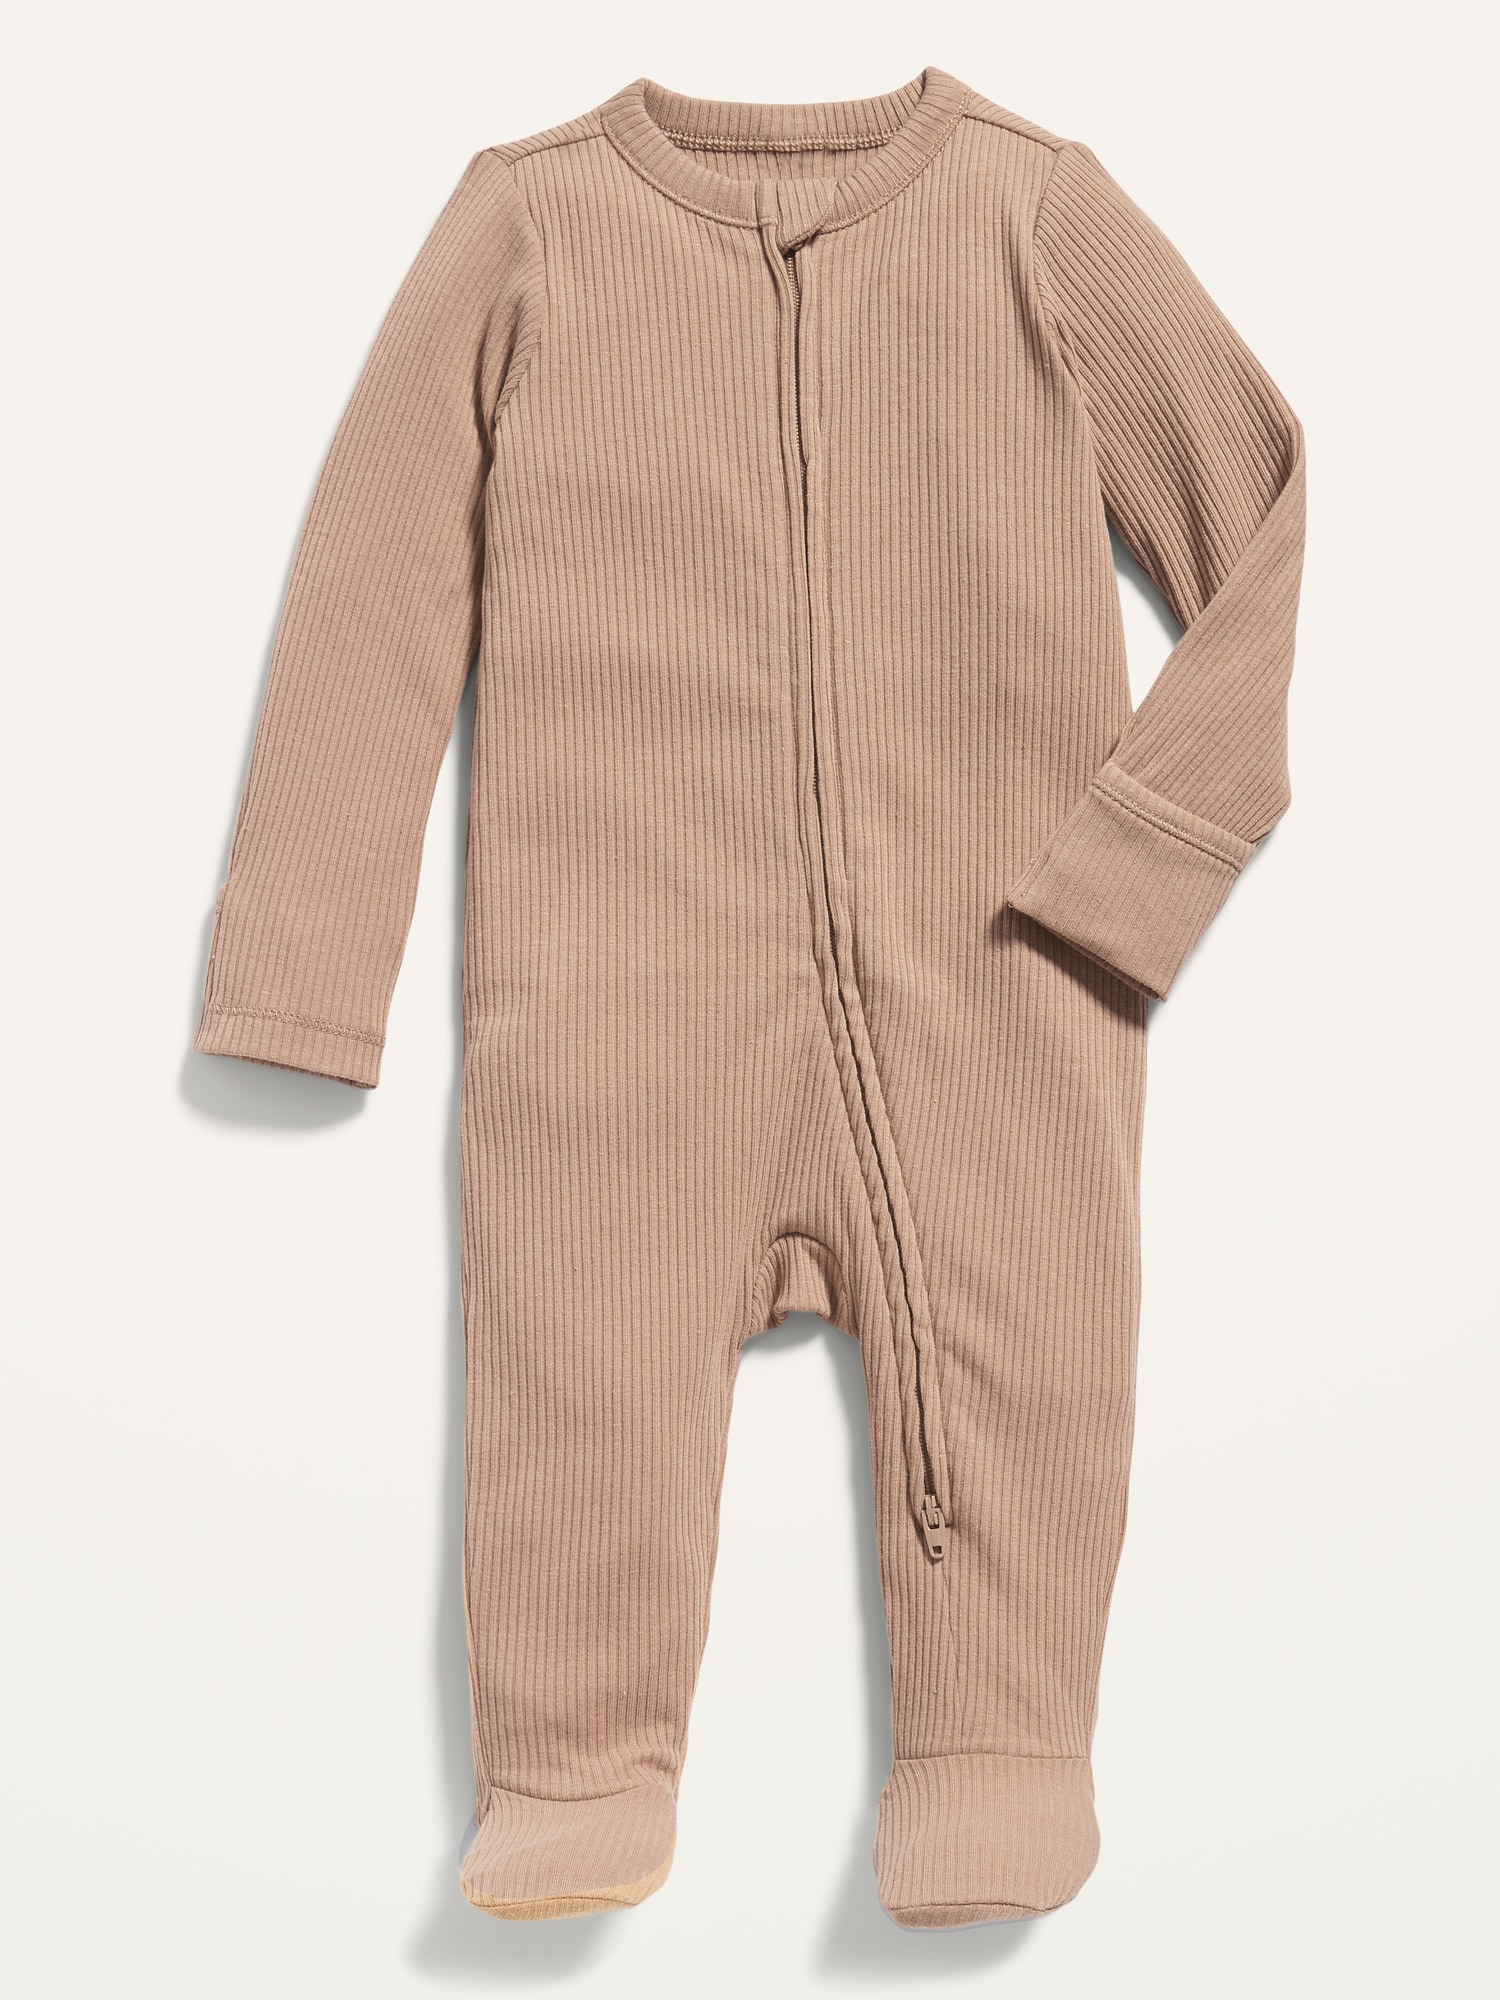 Unisex Rib-Knit 2-Way Sleep & Play Footed One-Piece fo Baby | Old Navy